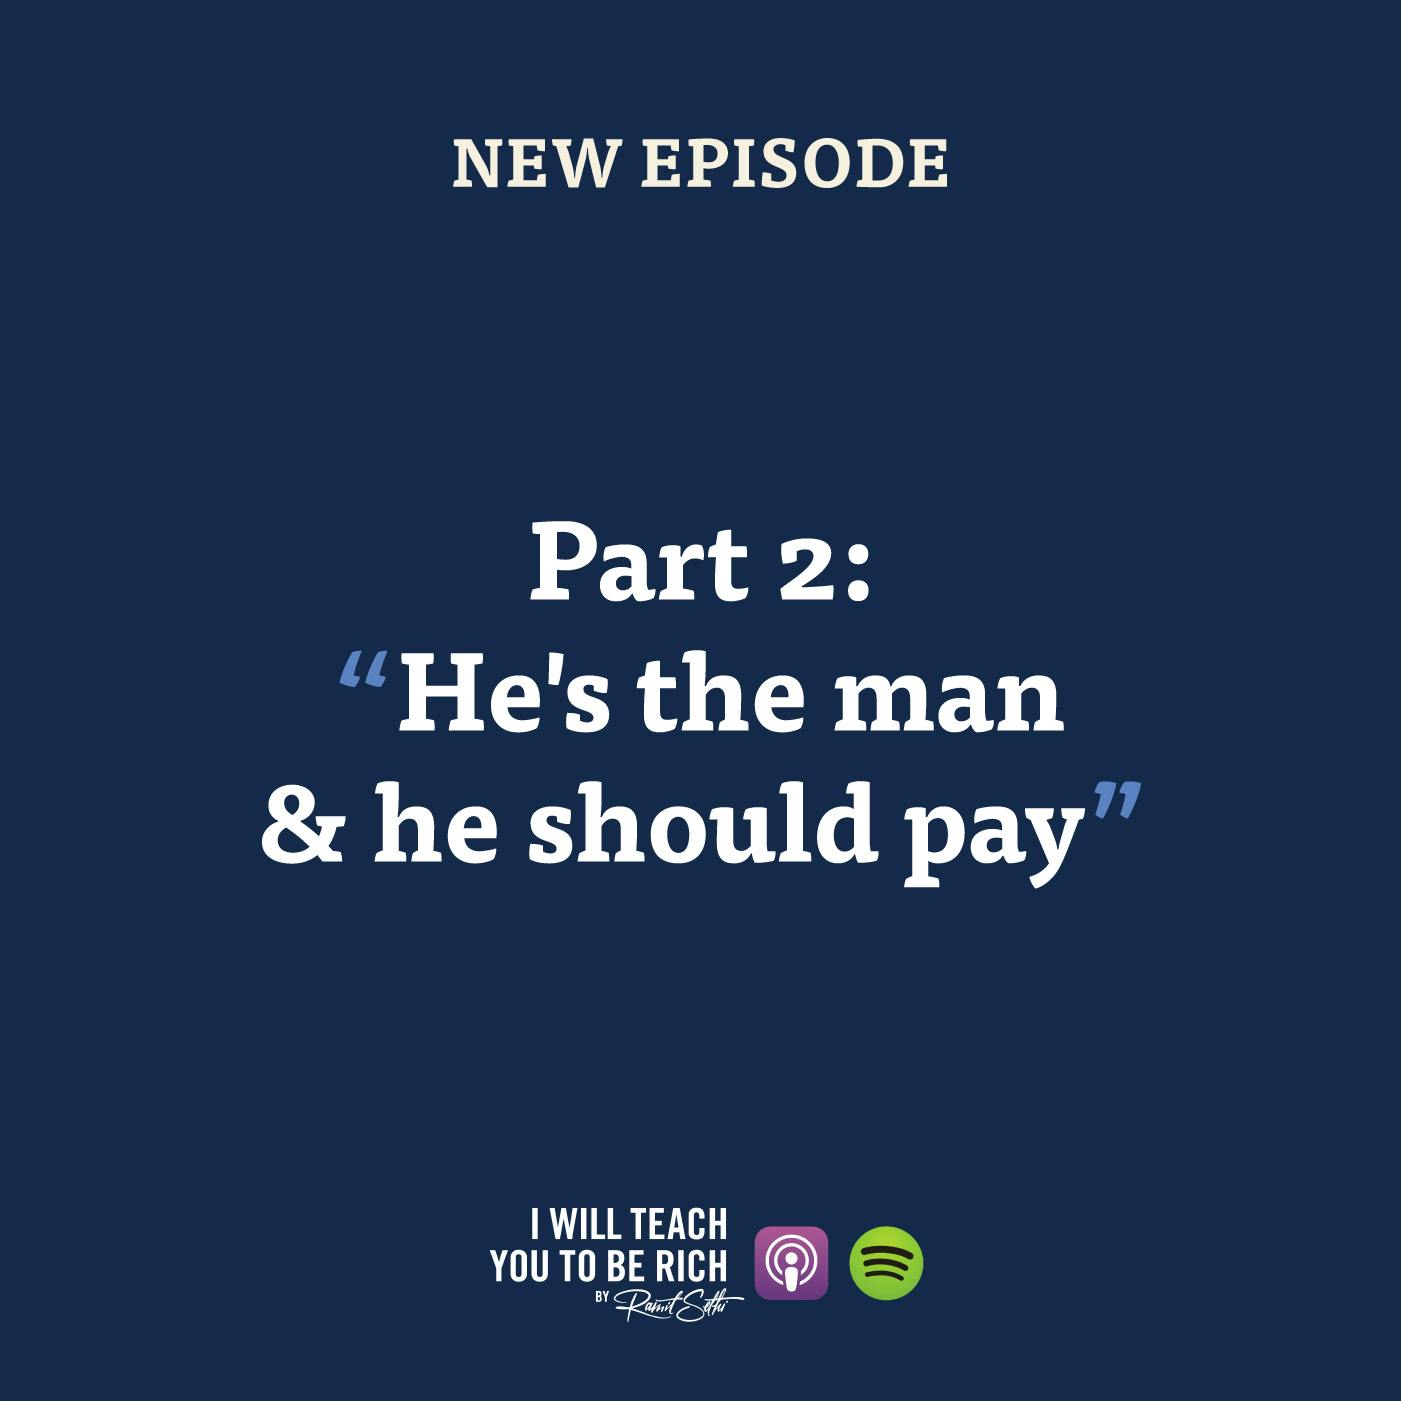 18. ”He’s the man & he should pay. We can’t go on like this any more”